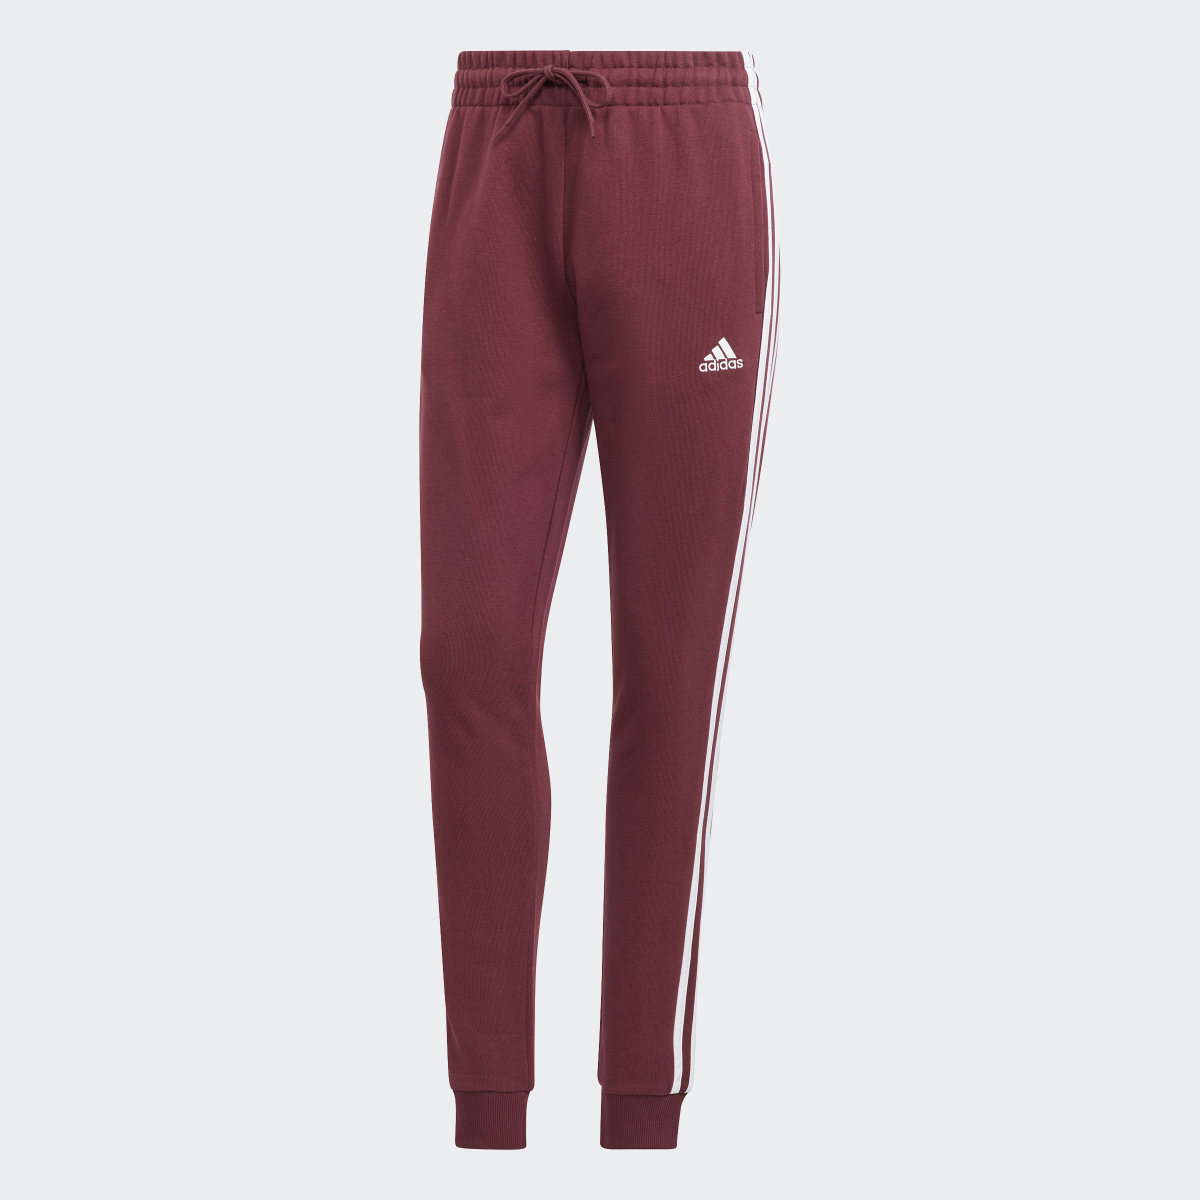 Adidas Essentials 3-Stripes French Terry Cuffed Pants. 4